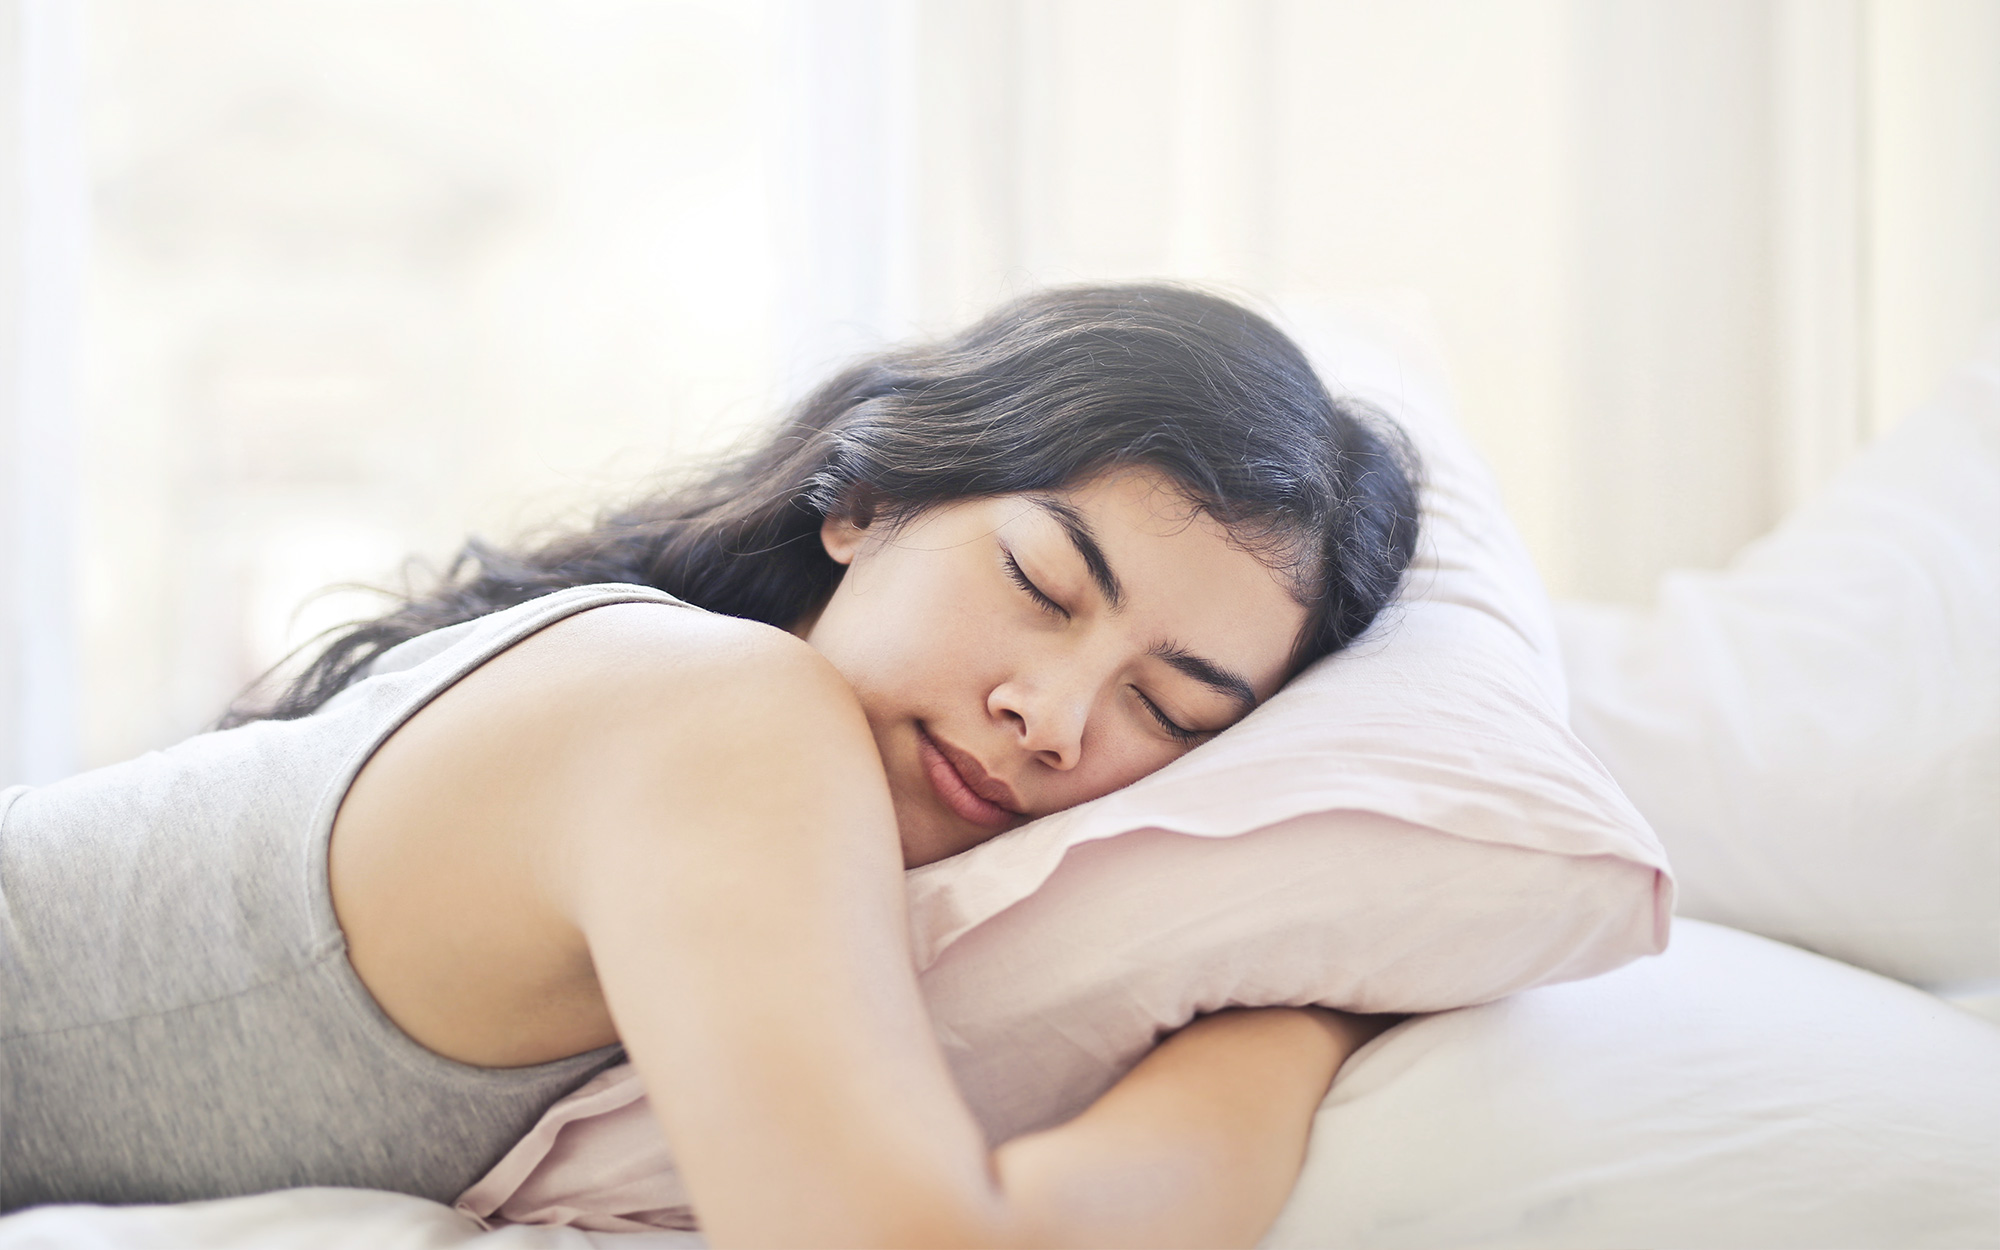 9 Interesting Facts your probably didnt know about sleep